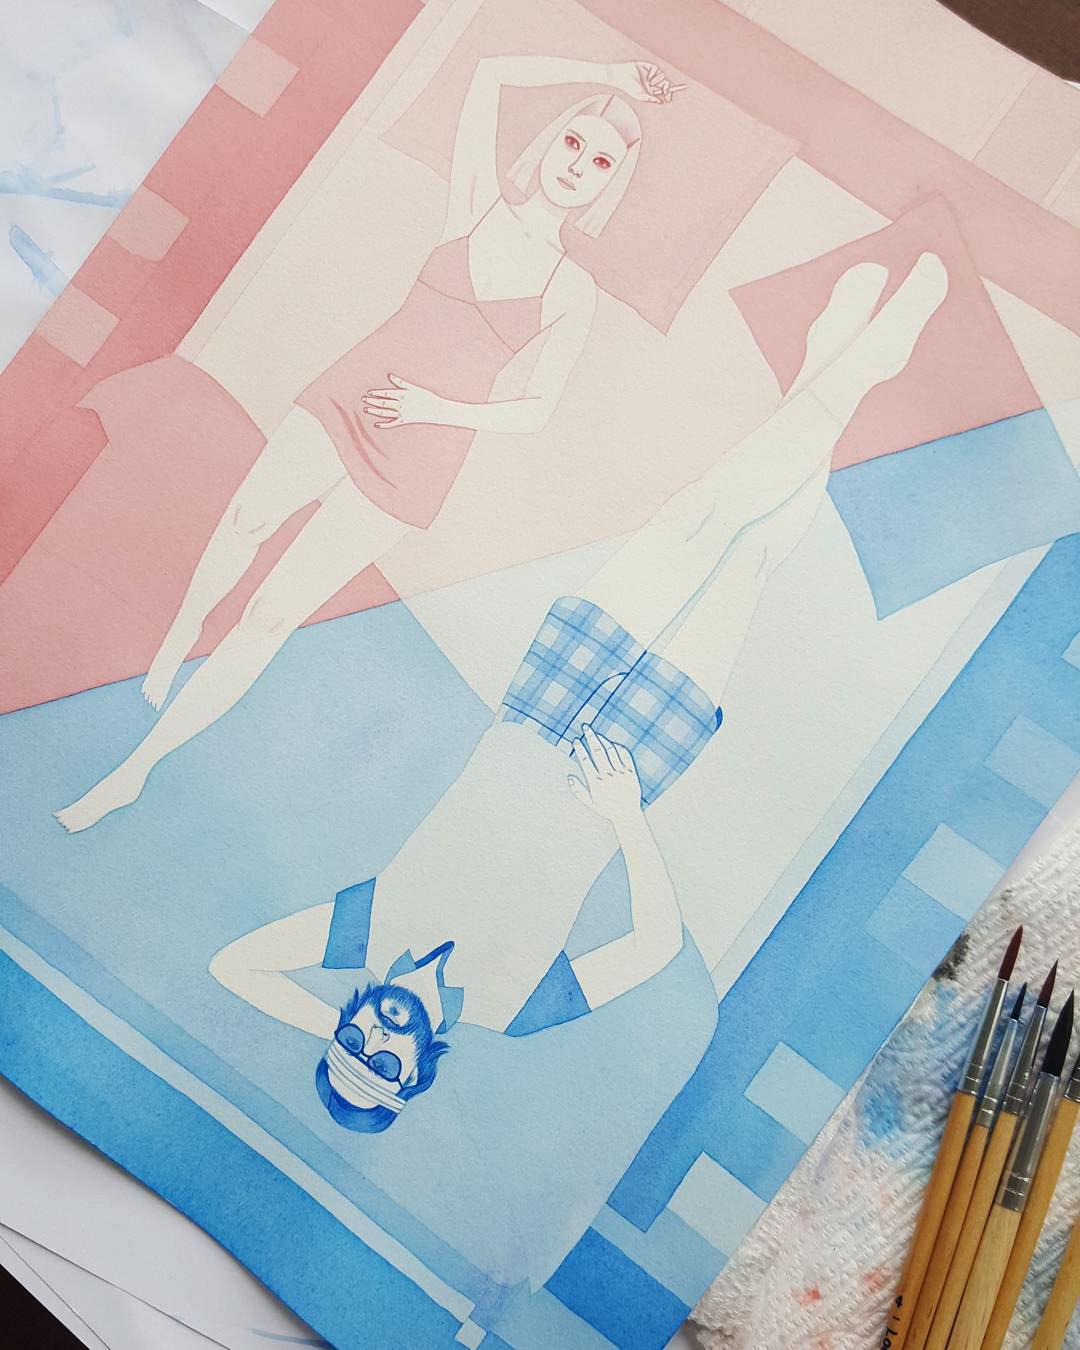 ILLUSTRATION  watercolor painting   wes anderson dream current composition